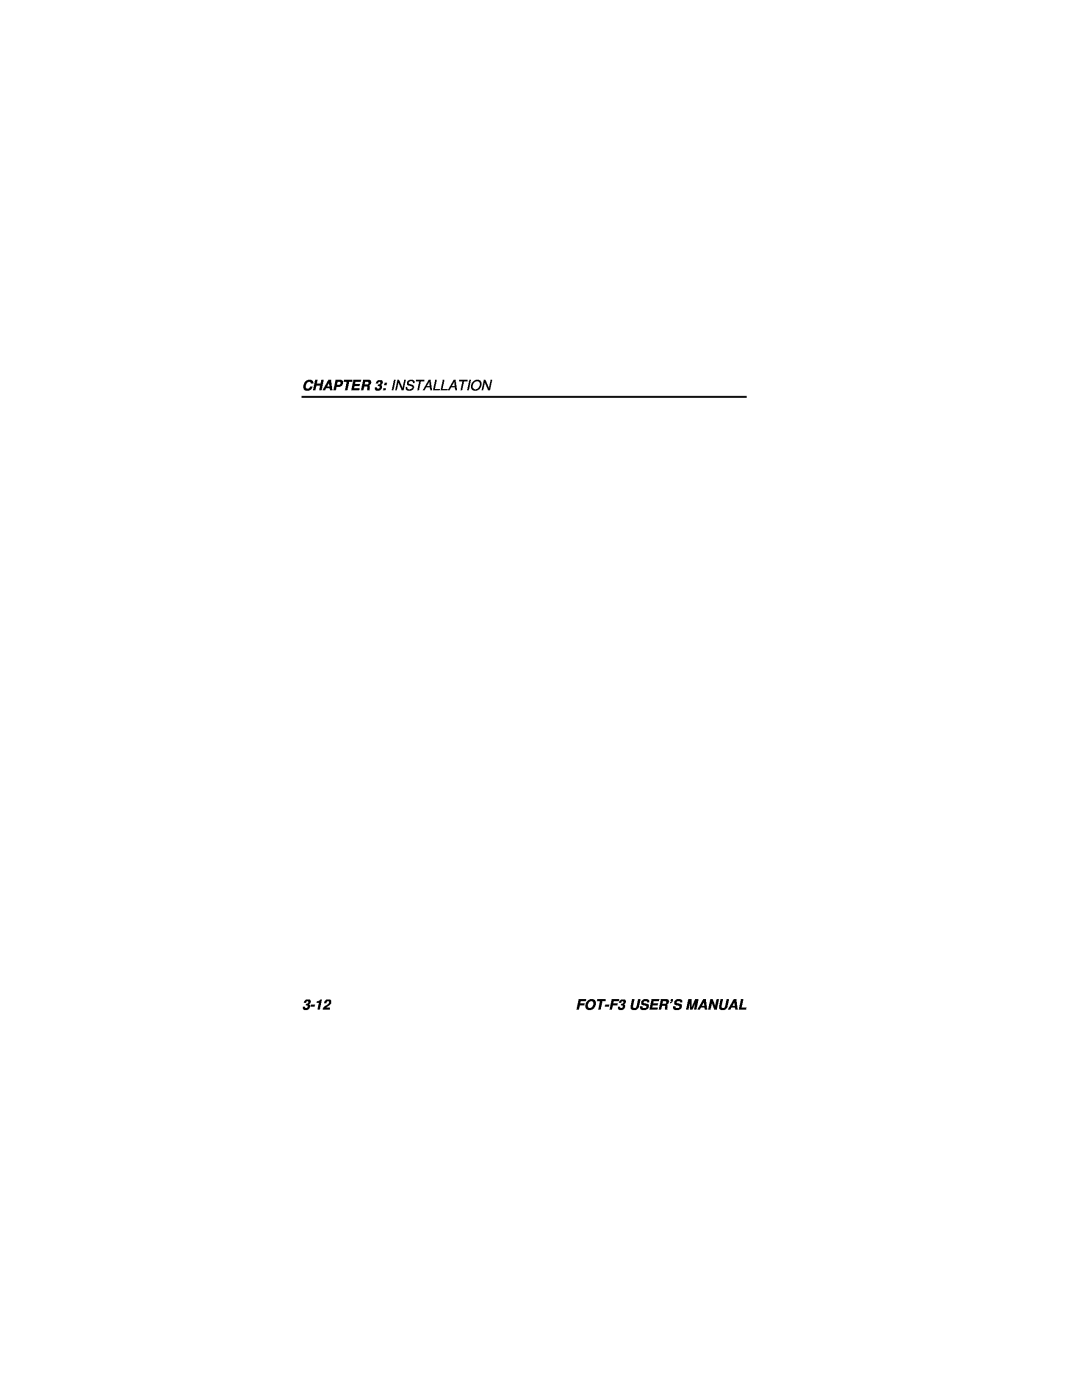 Cabletron Systems user manual Installation, 3-12, FOT-F3 USER’S MANUAL 